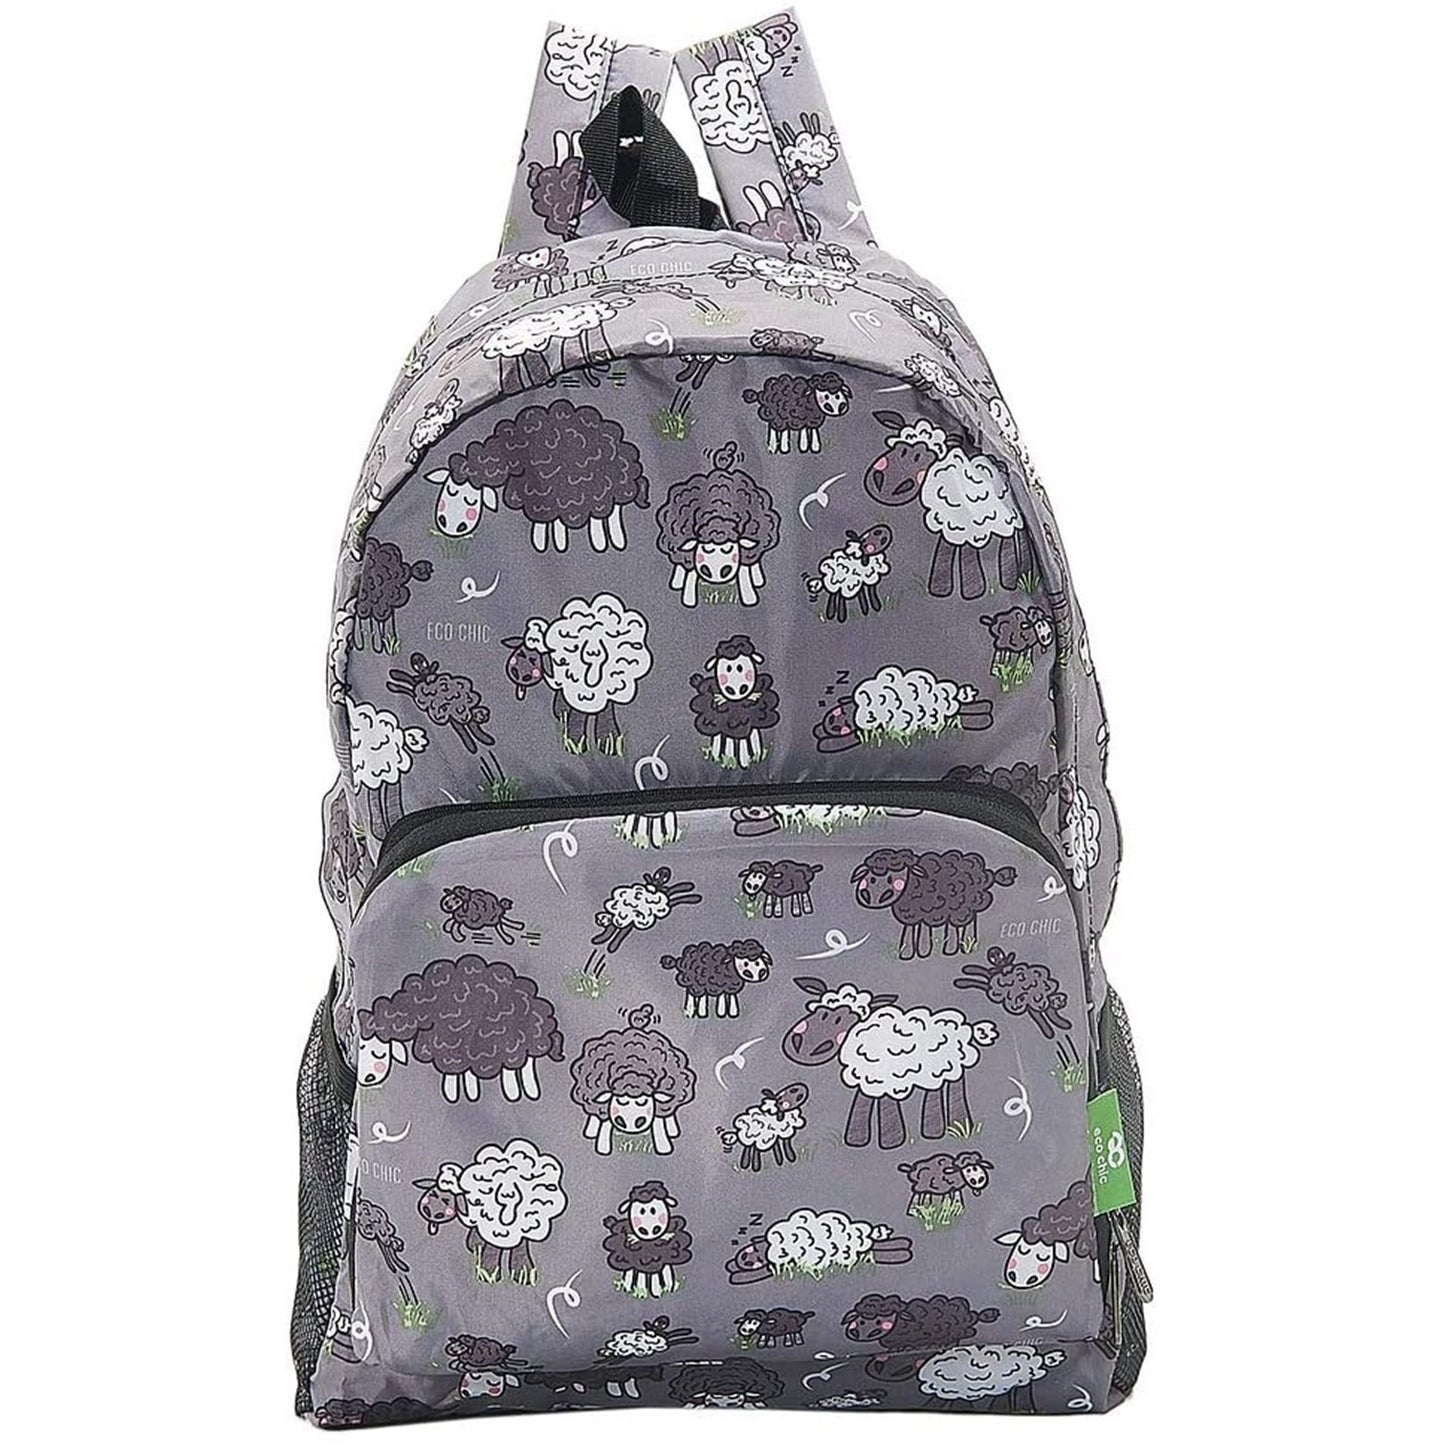 Eco Chic Lightweight Foldable Backpack (Sheep Grey)